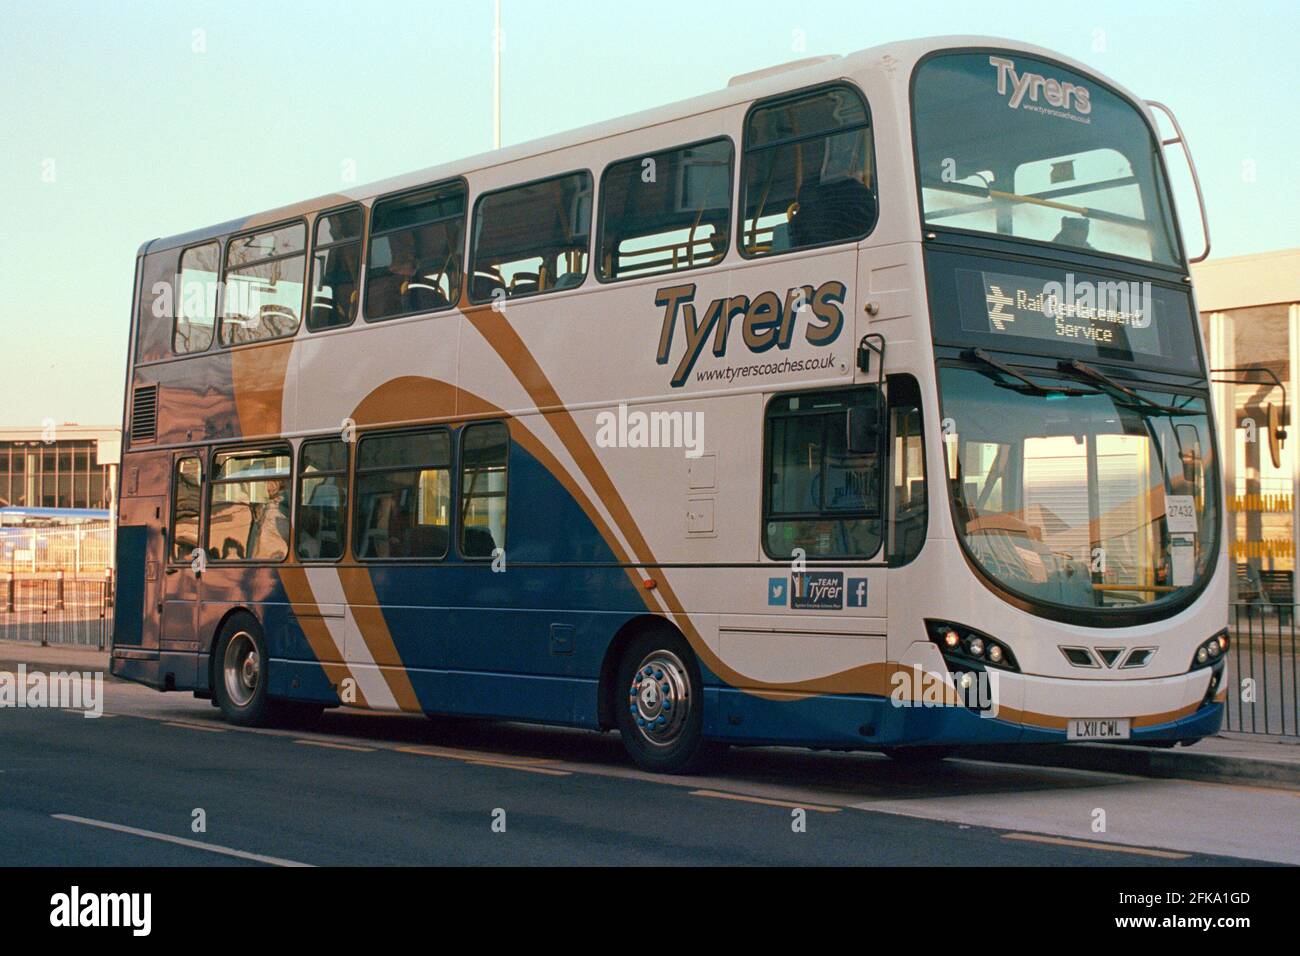 Bolton, UK - February 2021: A double decker bus operated by Tyrers at Bolton railway station for rail replacement service. Stock Photo